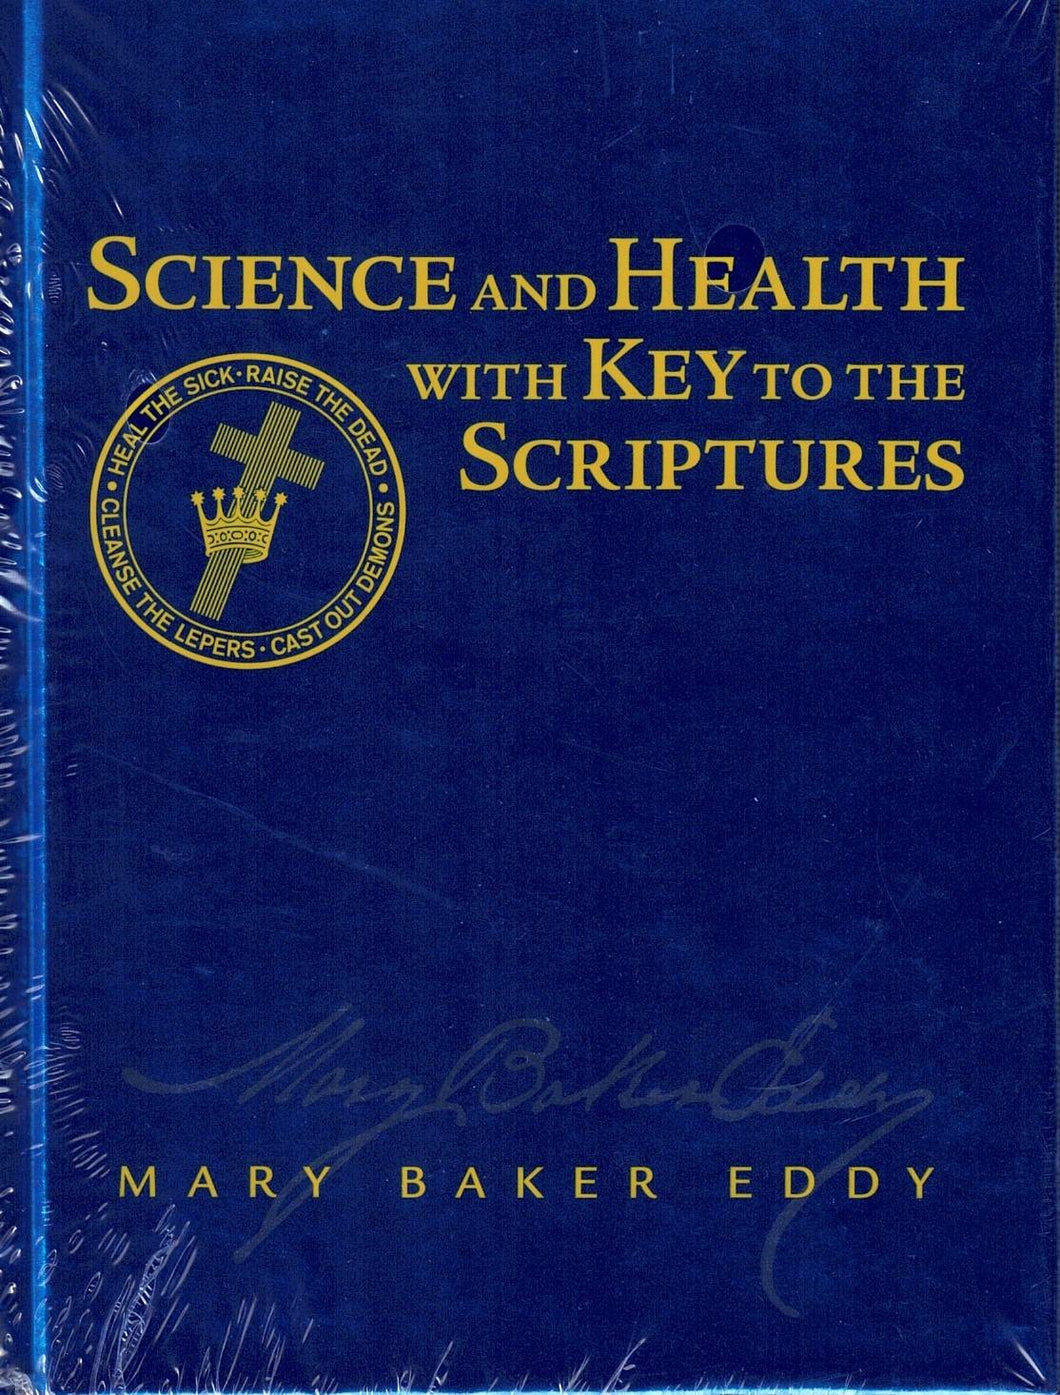 Science and Health with Key to the Scriptures - Study Edition (Metallic blue hardback)